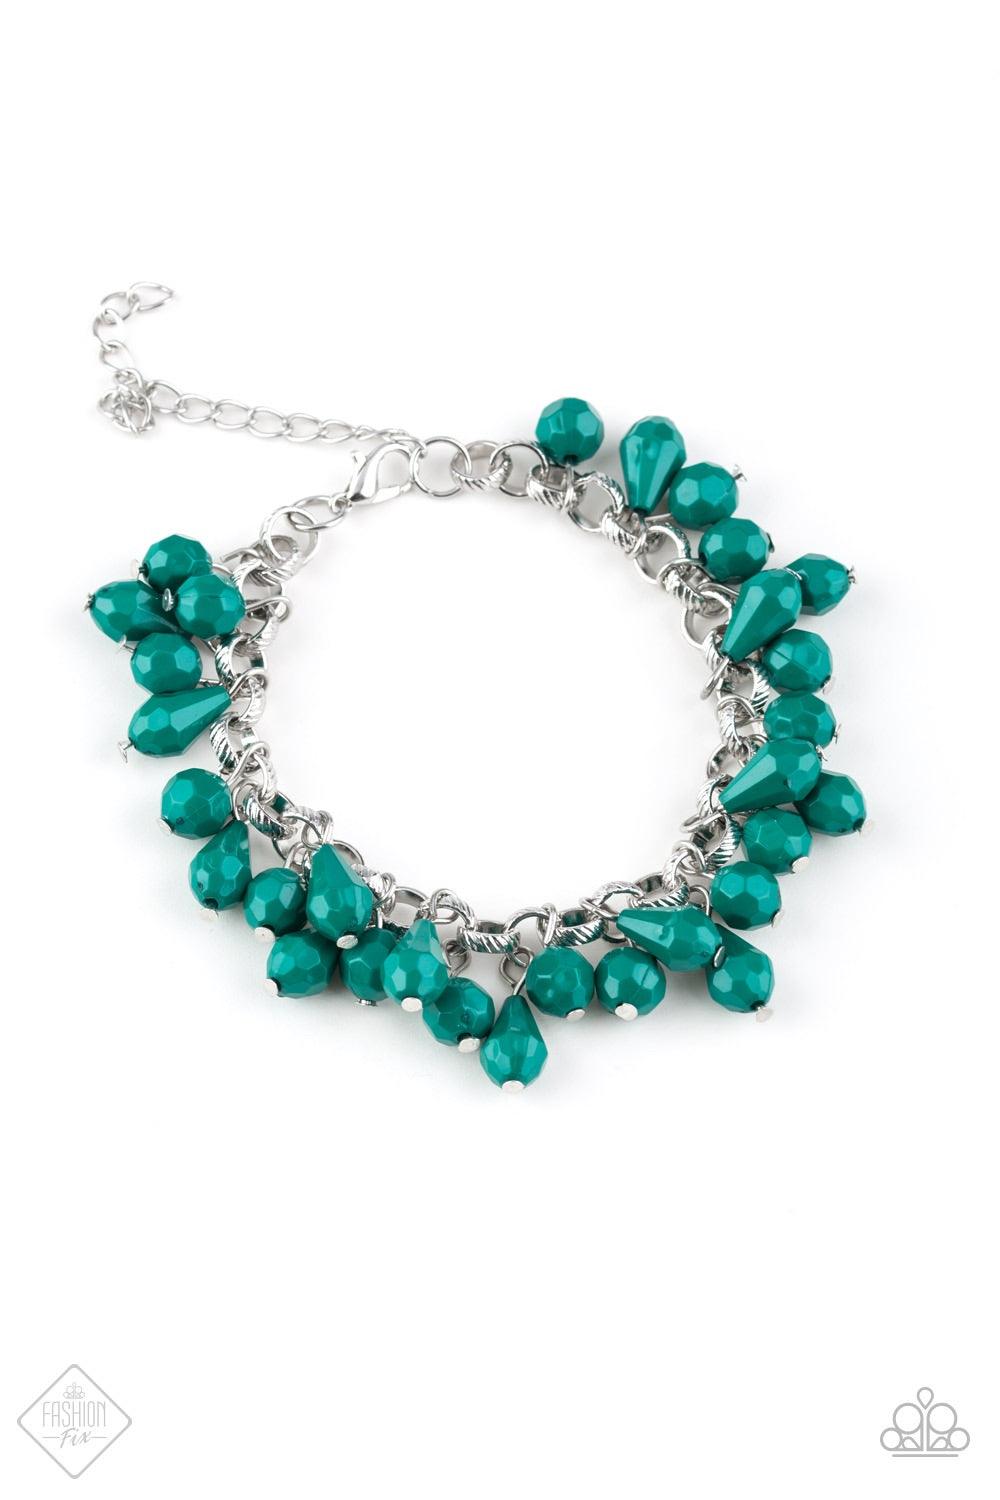 Paparazzi Accessories Malibu Masquerade - Green Featuring round and teardrop shapes, clusters of faceted Quetzal Green beads swing from a shimmery silver chain, creating a playful fringe around the wrist. Features an adjustable clasp closure. Jewelry